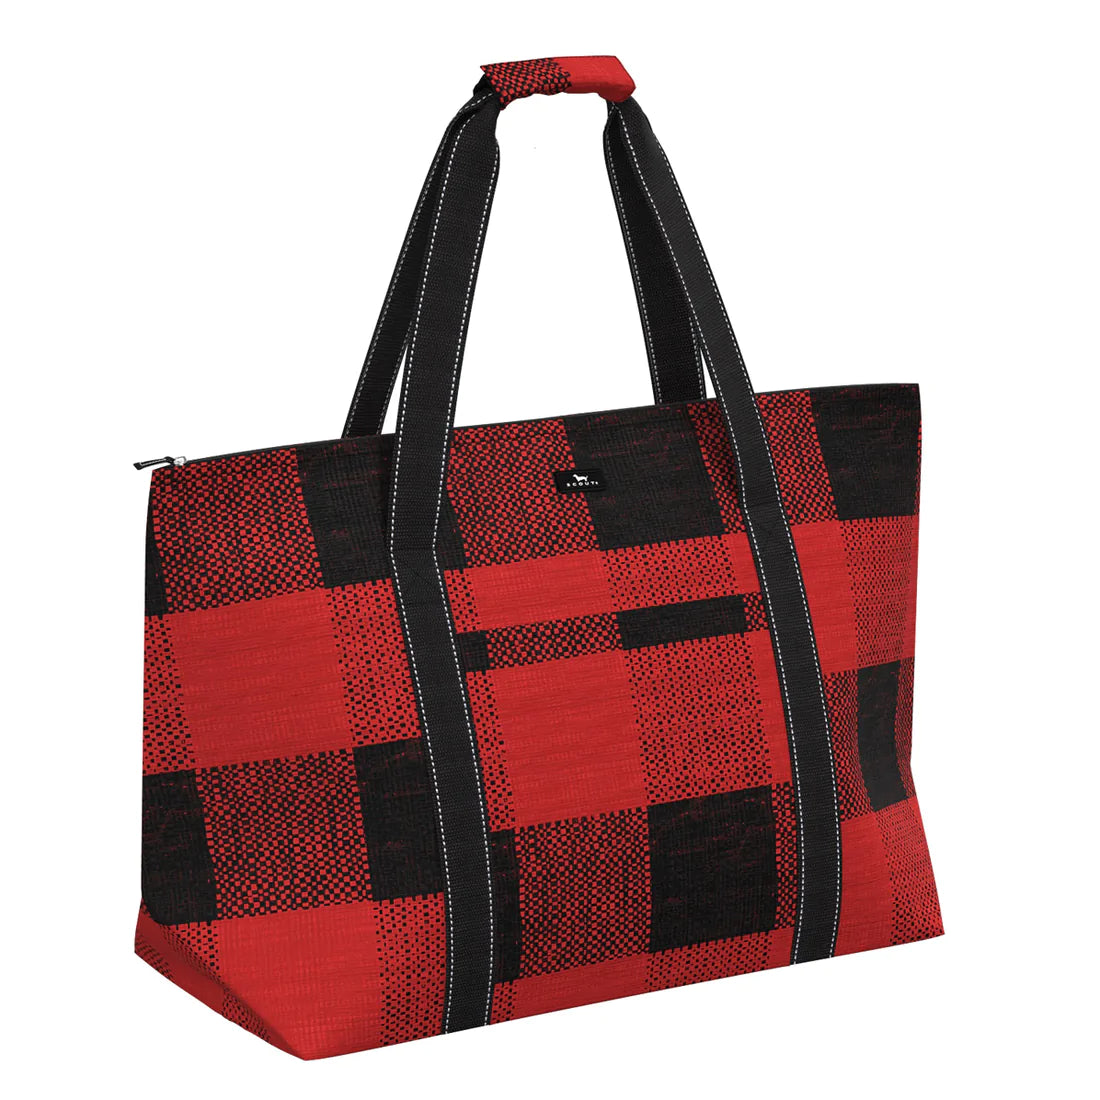 Scout On Holiday Travel Bag - Chili/Black Check